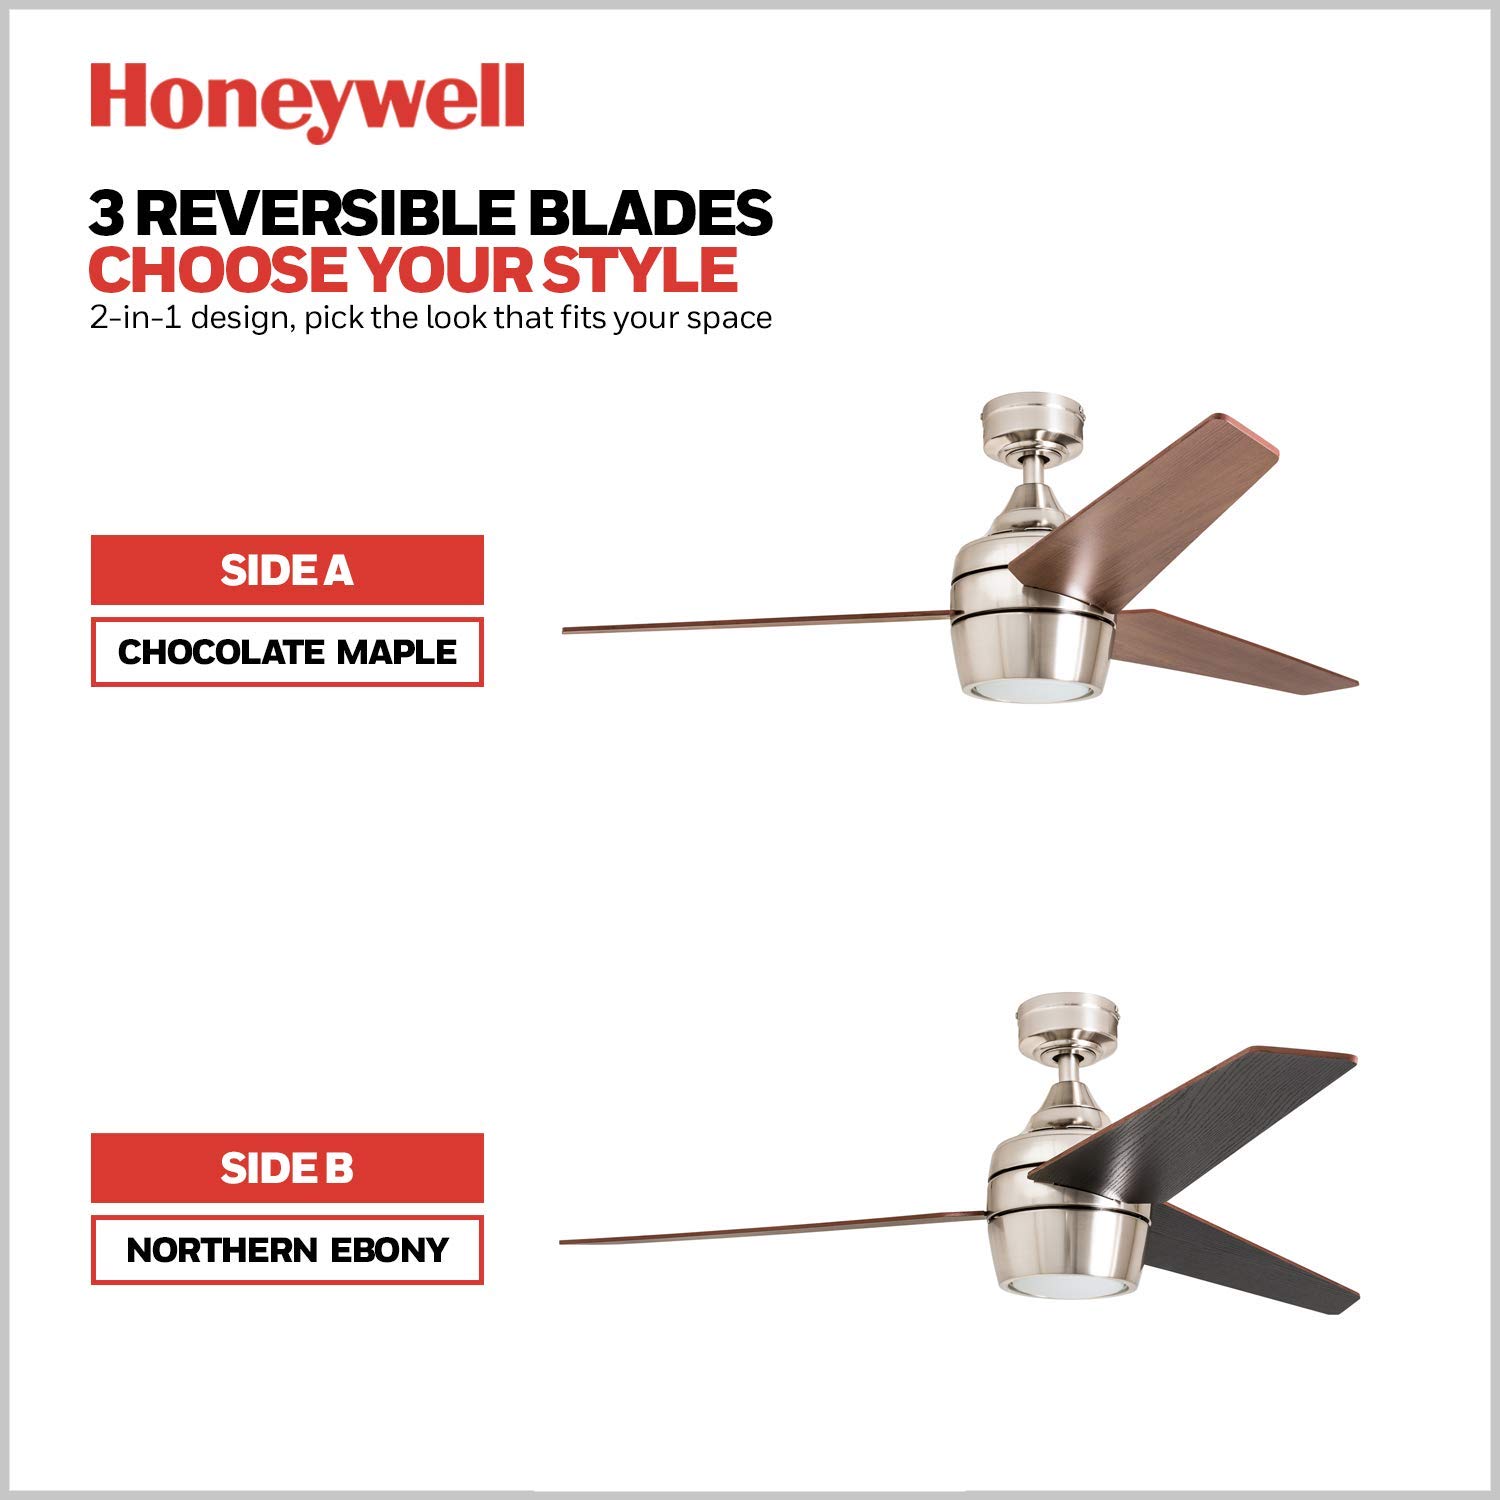 Honeywell Ceiling Fans Eamon, 52 Inch Modern Indoor LED Ceiling Fan with Light, Remote Control, Three Mounting Options, 3 Dual Finish Blades, Reversible Motor - 50604-01 (Brushed Nickel)